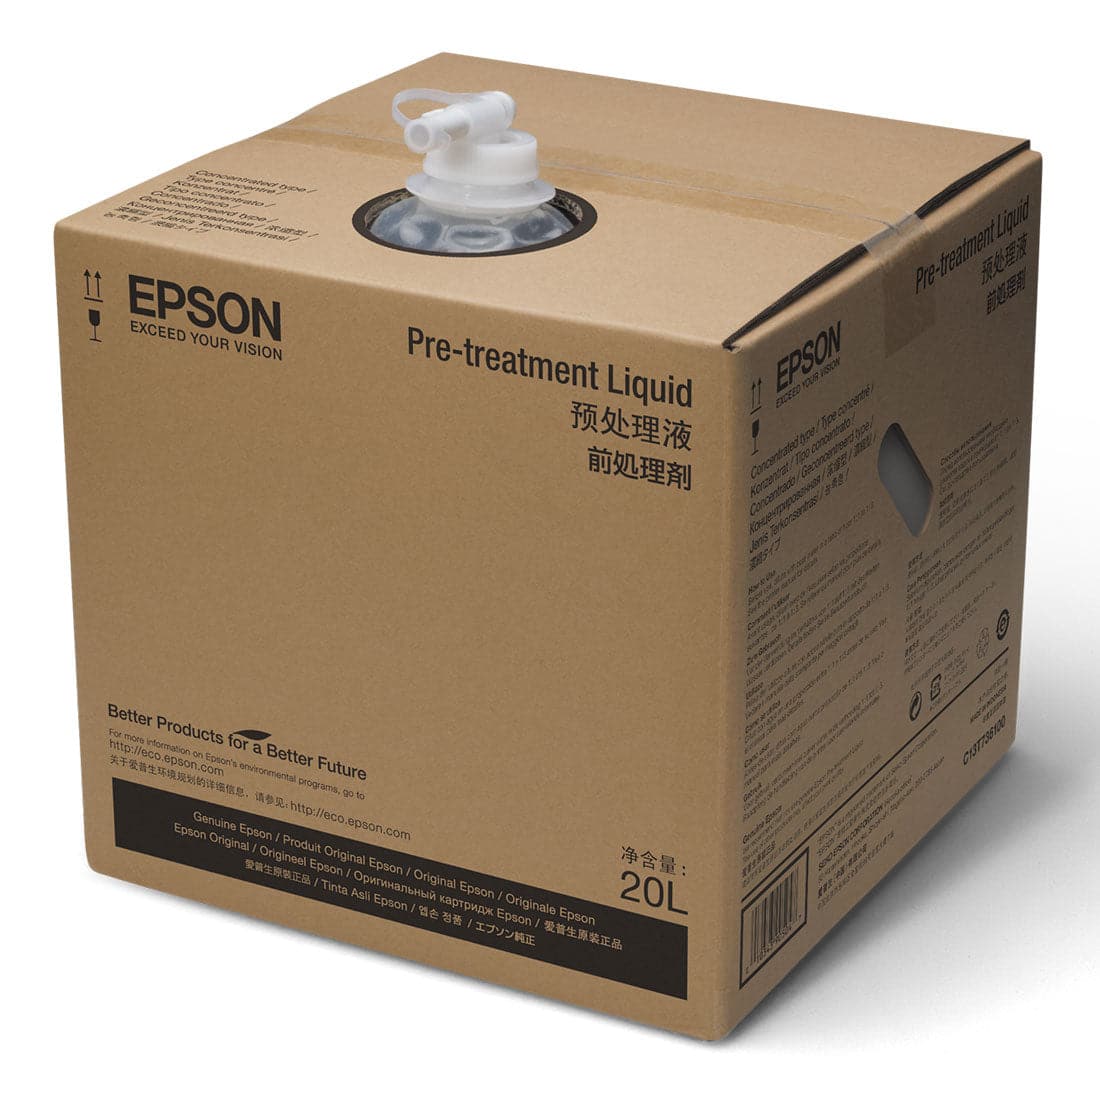 Epson® Pretreatment Fluid For Polyester - Joto Imaging Supplies US